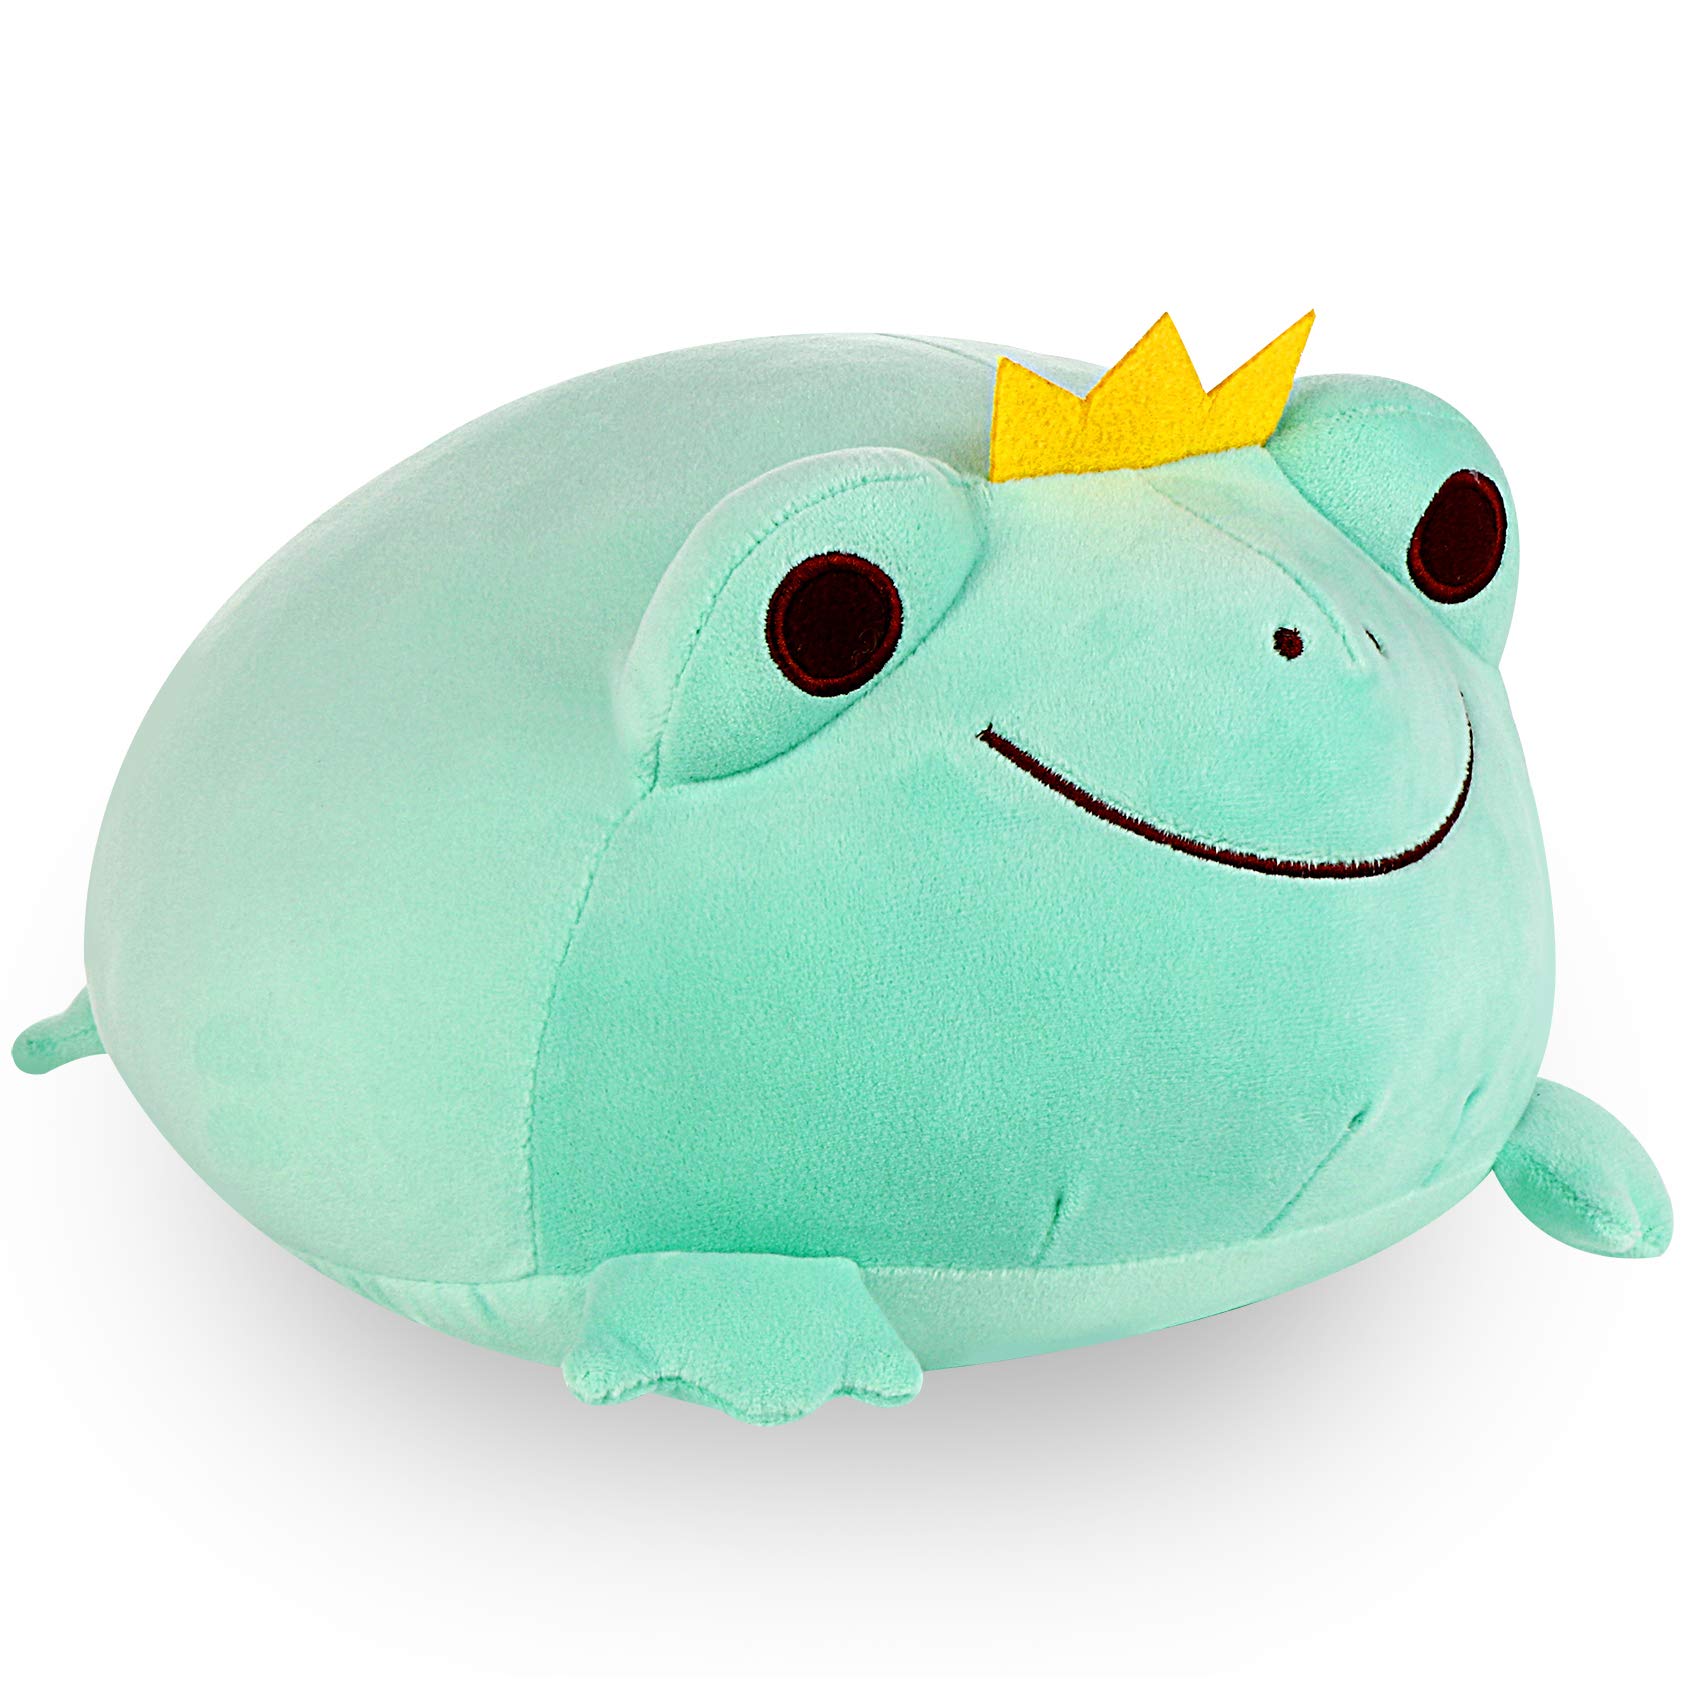 JUNERAIN Super Soft Frog Plush Stuffed Animal Cute Frog Squishy Hugging  Pillow Adorable Frog Plushie Toy Gift for Kids Toddlers Children Girls Boys  Baby Cuddly Plush Frog Decoration 35cm Grass Green 35cm